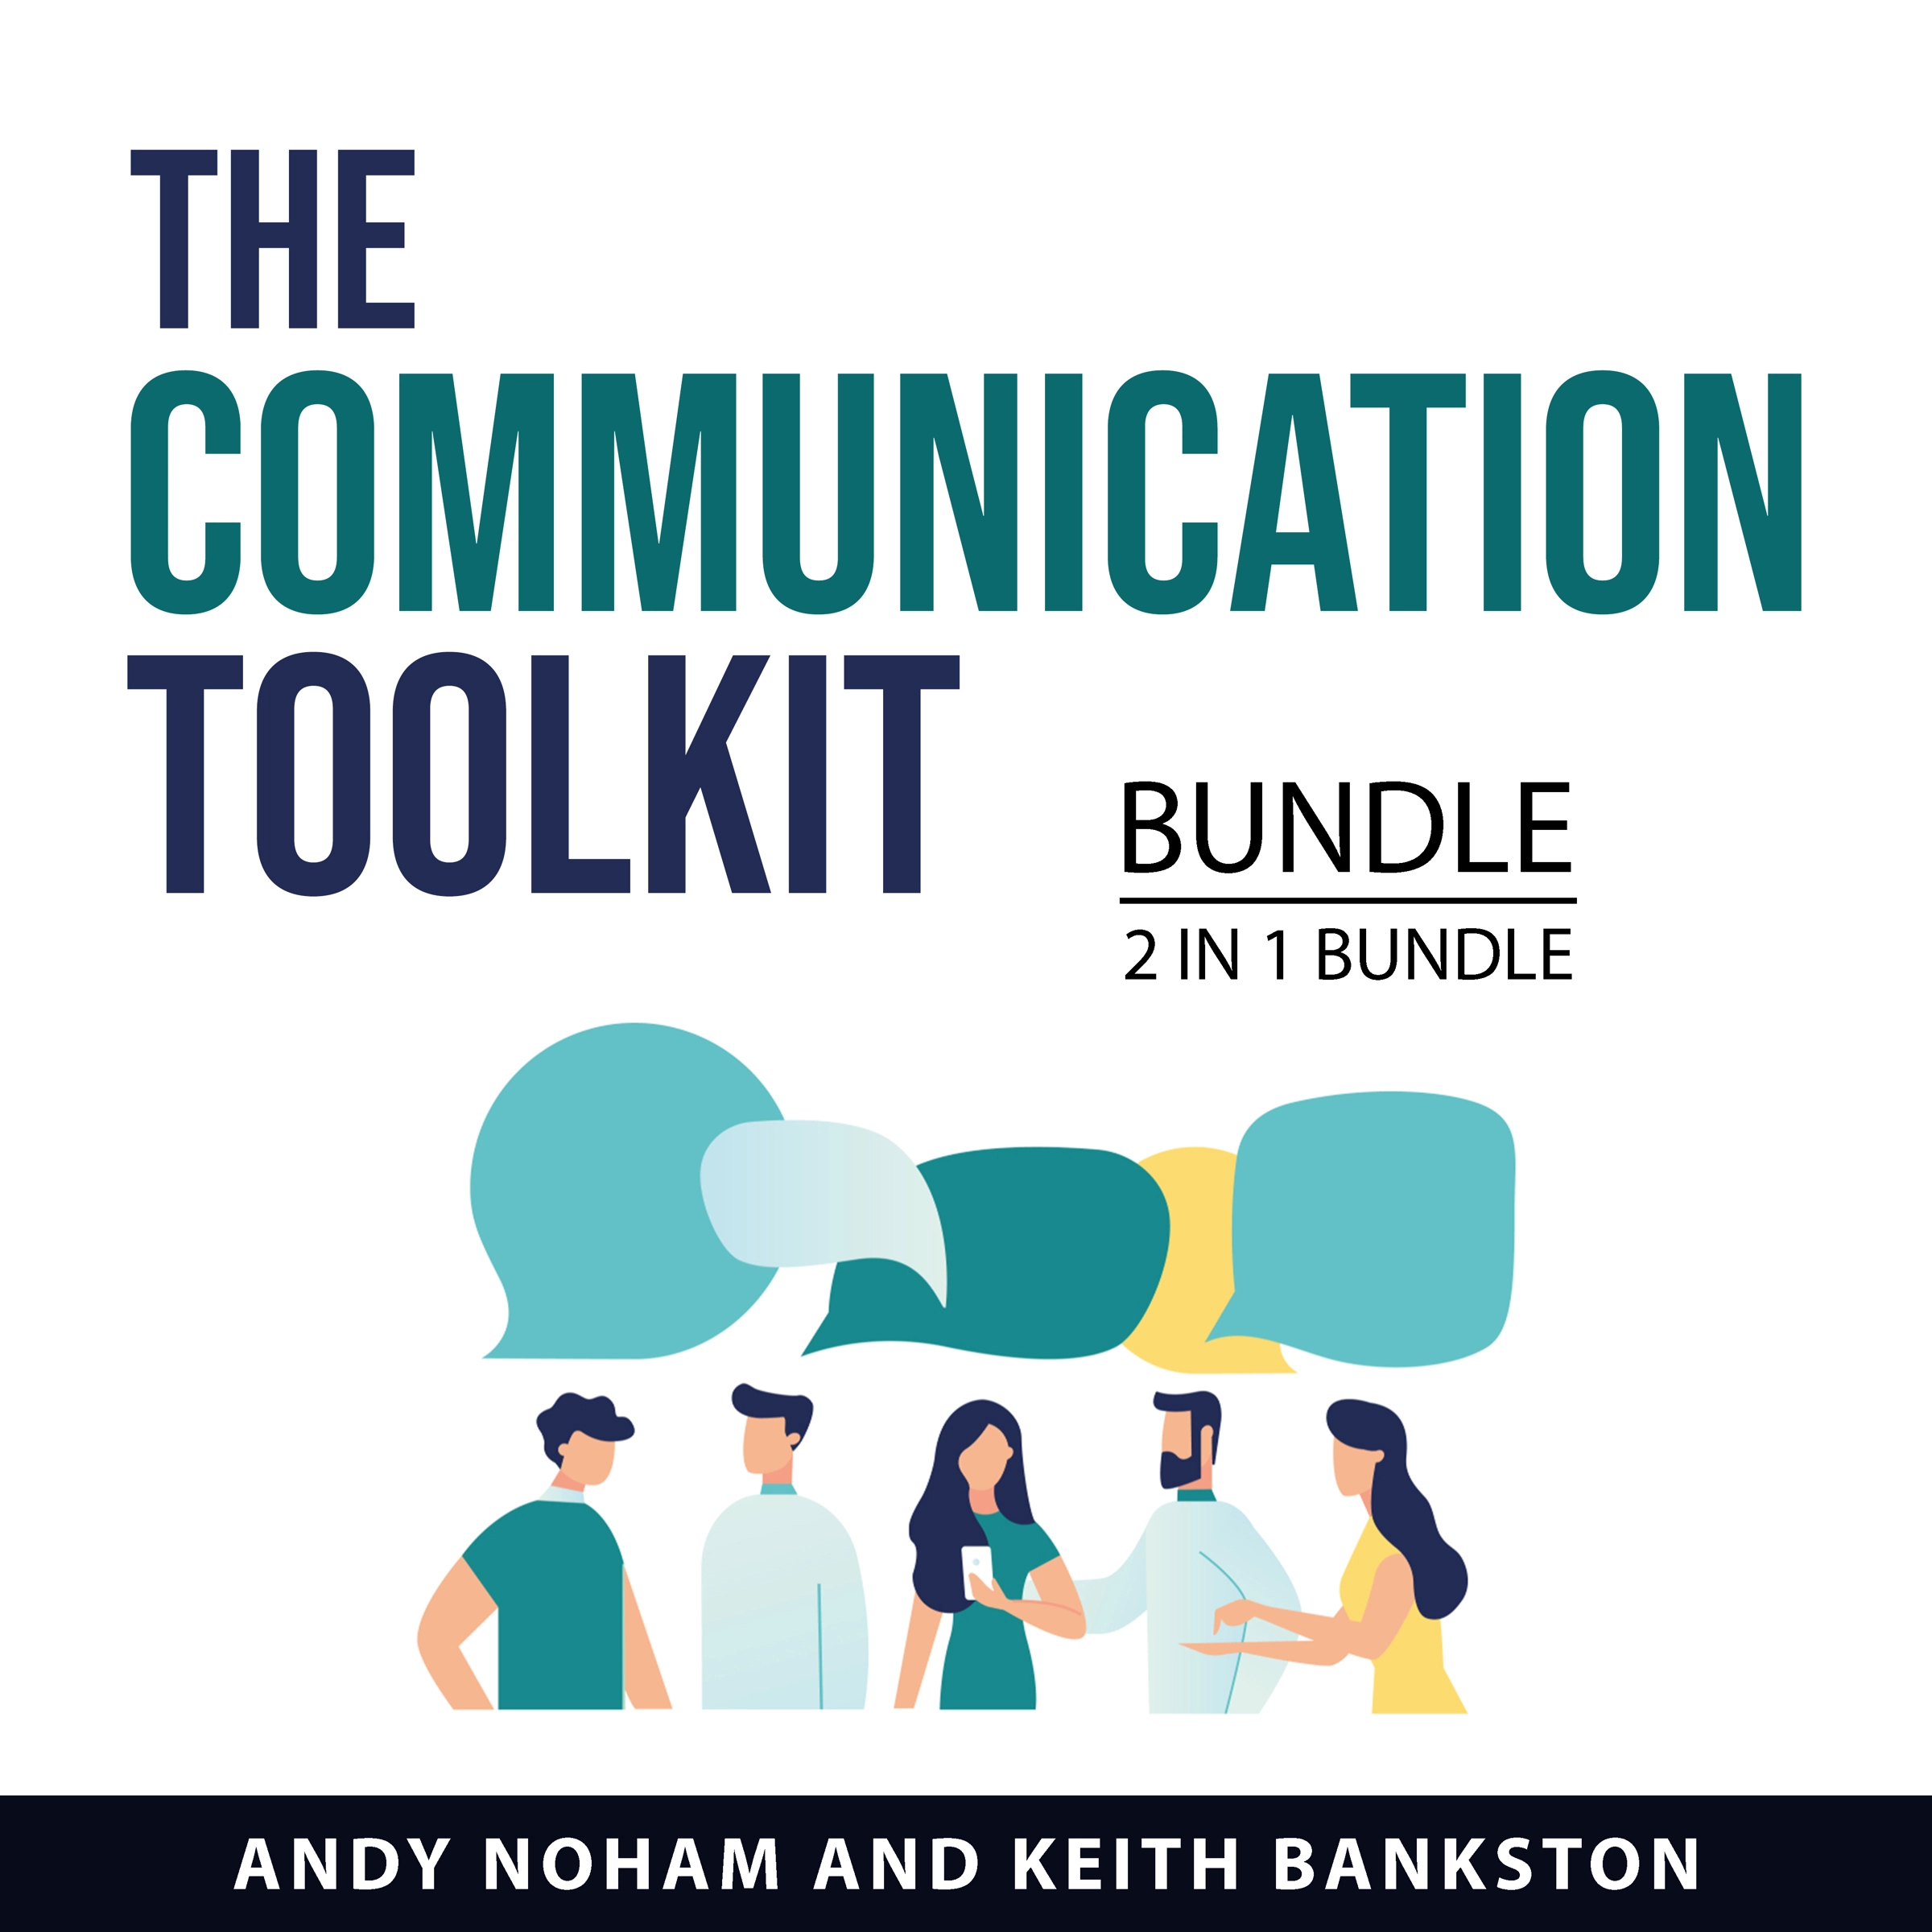 The Communication Toolkit Bundle, 2 in 1 Bundle Audiobook by Keith Bankston